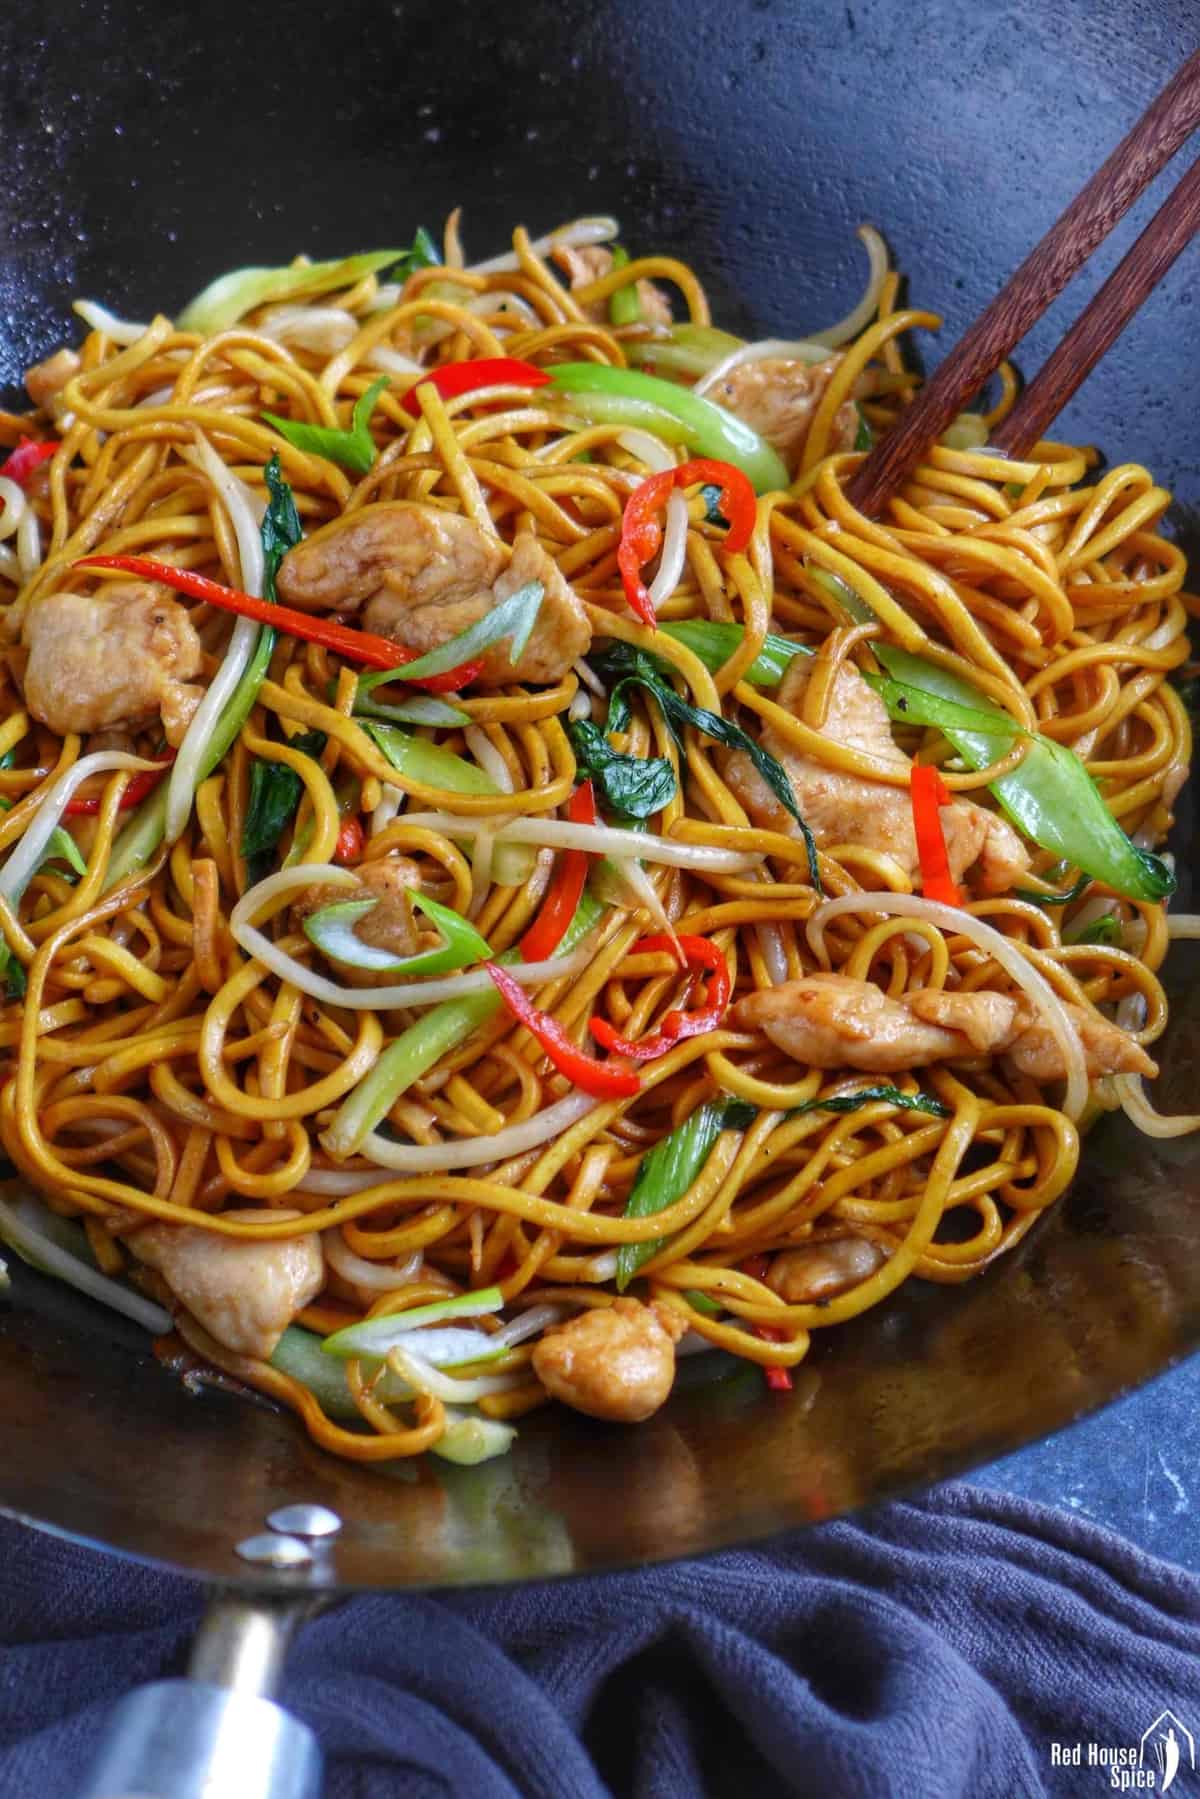 What Are Chinese Fried Noodles?